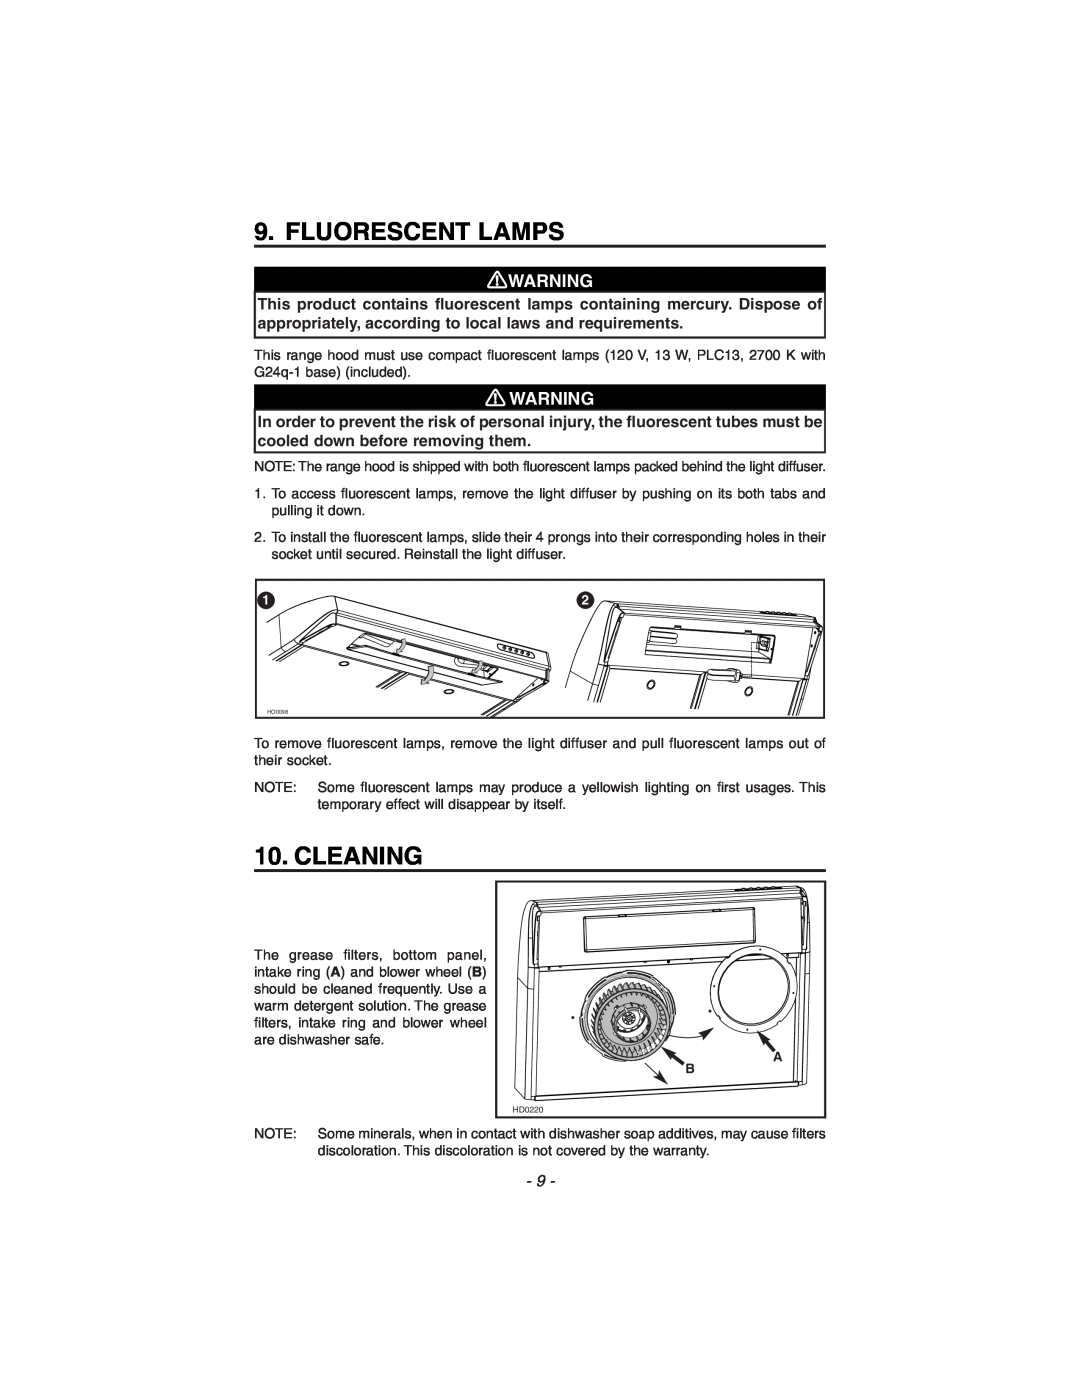 Zephyr ES1-E30AS, ES1-30AW, ES1-E30AB installation instructions Fluorescent Lamps, Cleaning 